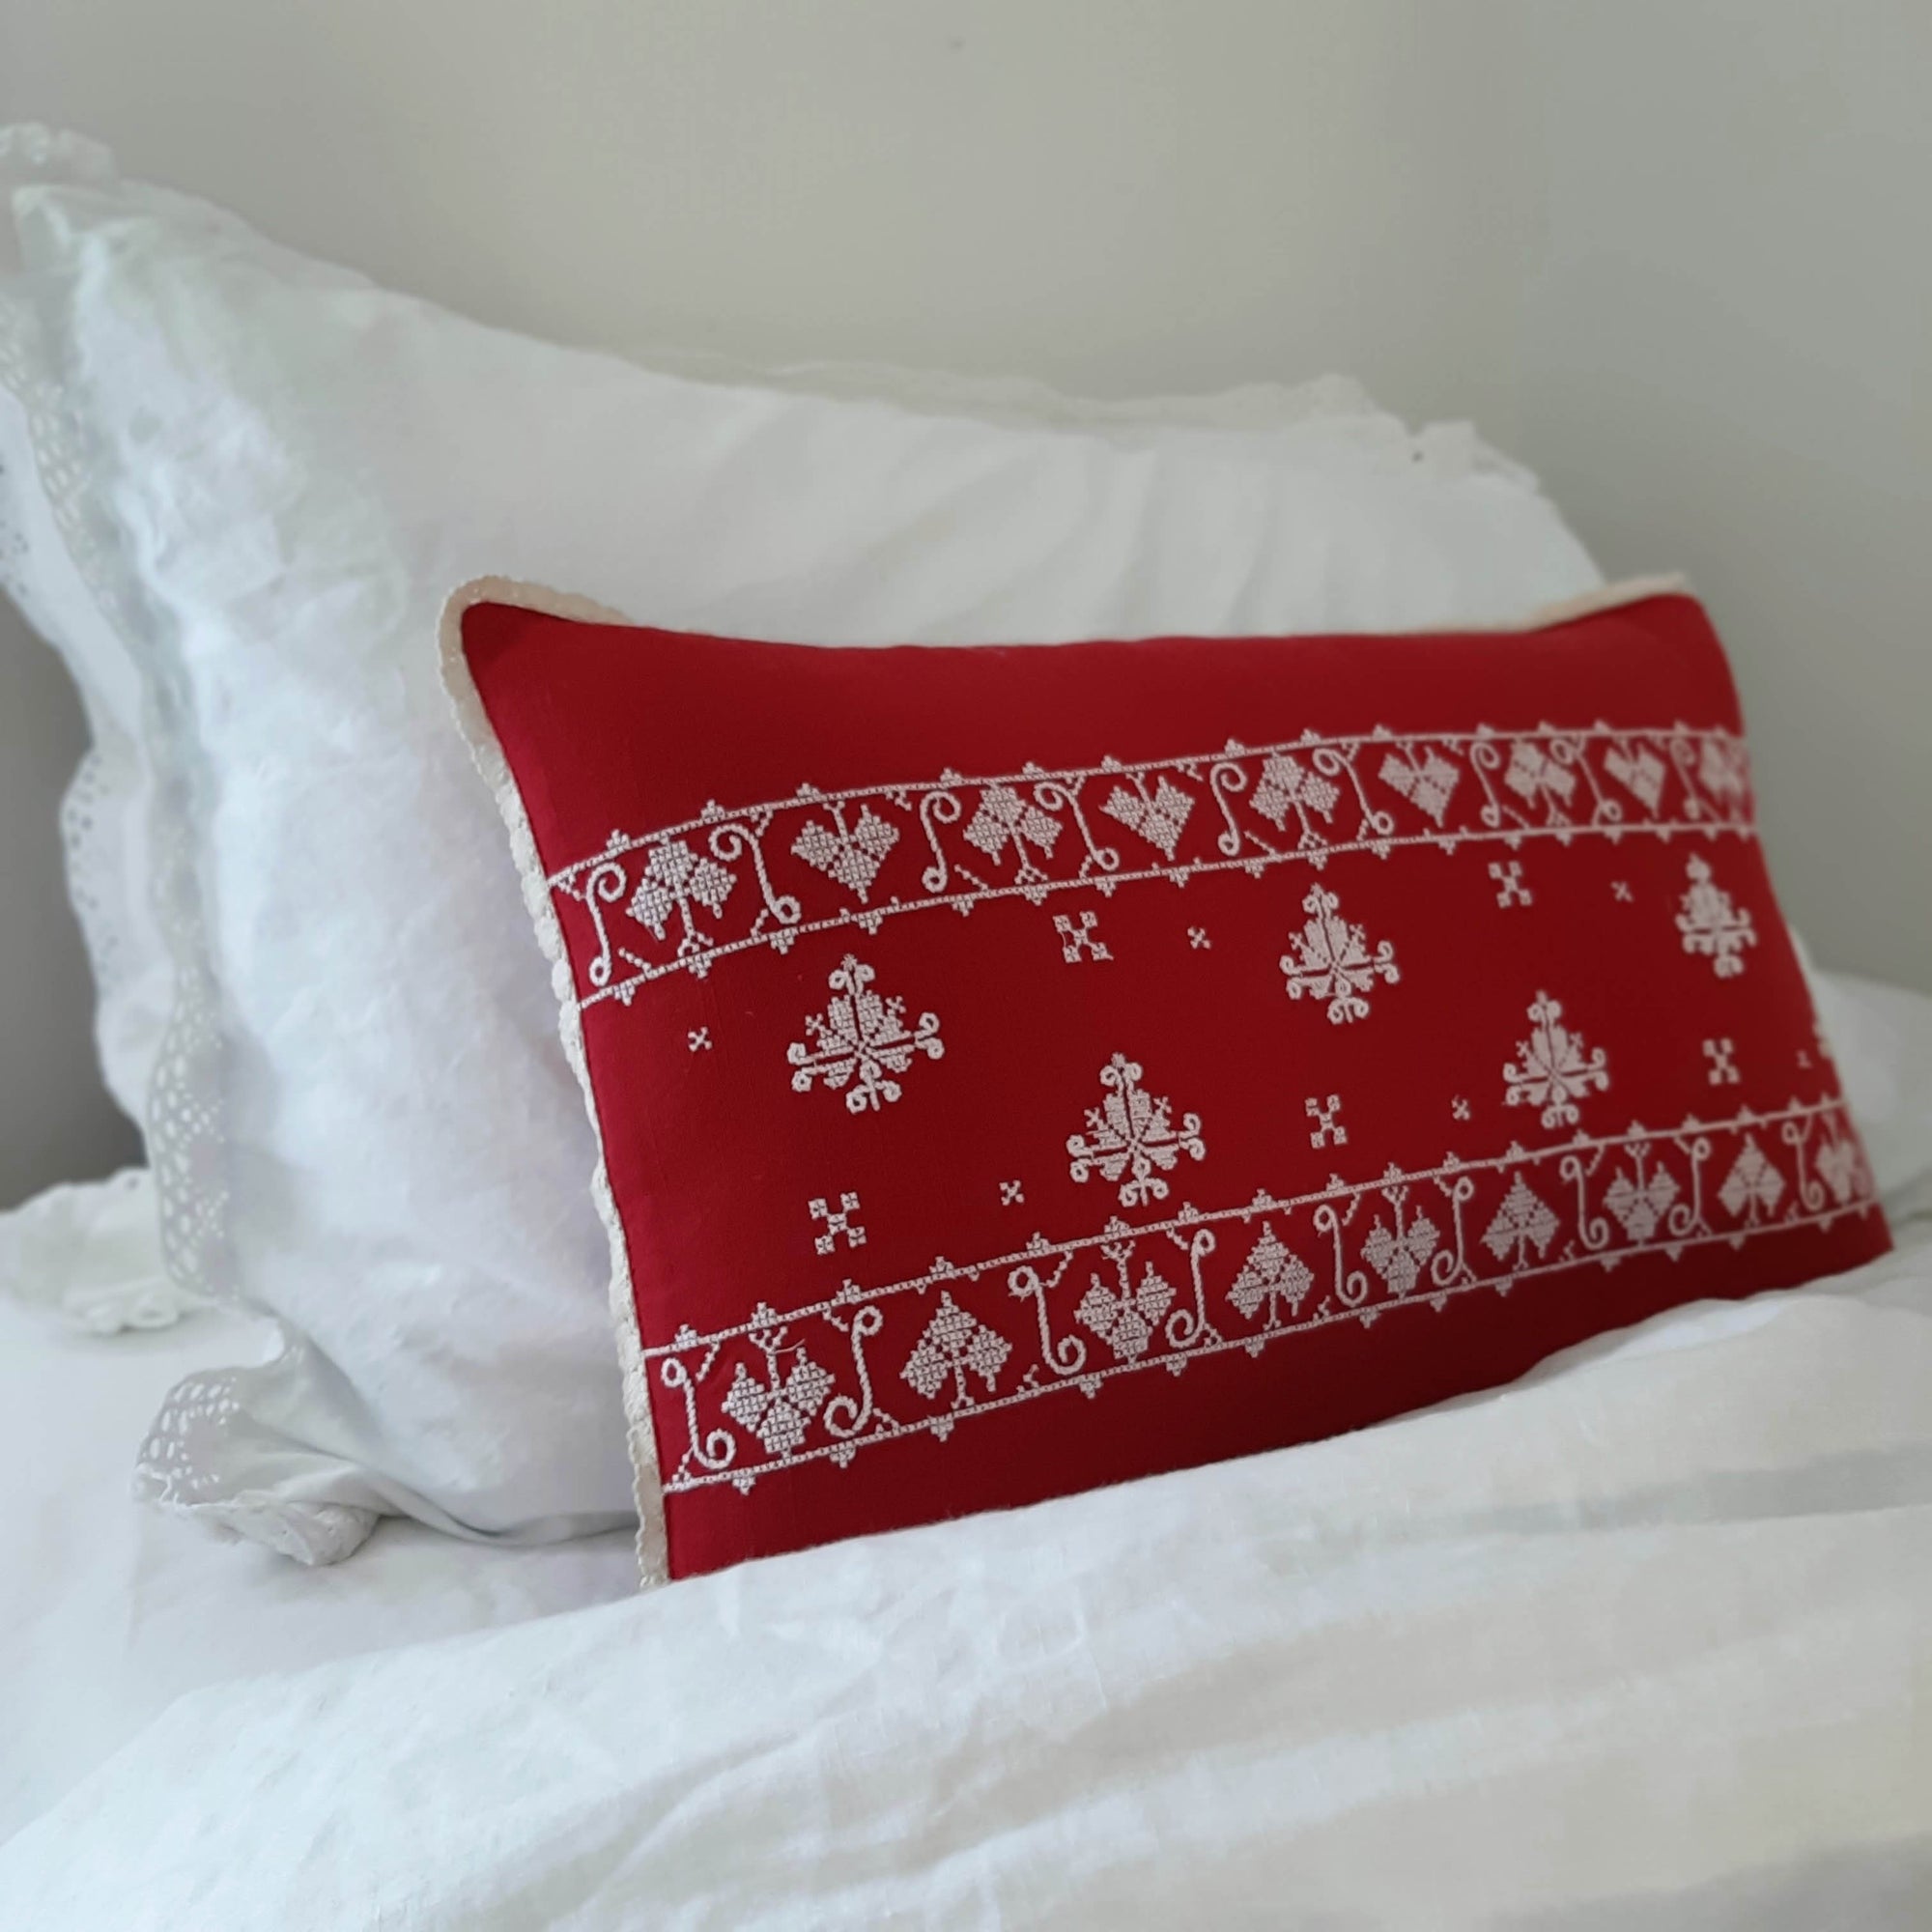 The Scandi Cottage Embroidered Pillow lends a cheerful vintage touch to any room. This beautifully hand embroidered Scandinavian-inspired accent pillow features bright white embroidery against a red background with crochet lace trim. The back features a classic plaid with a button closure. 100% cotton. Includes insert. 18"L x 12"H